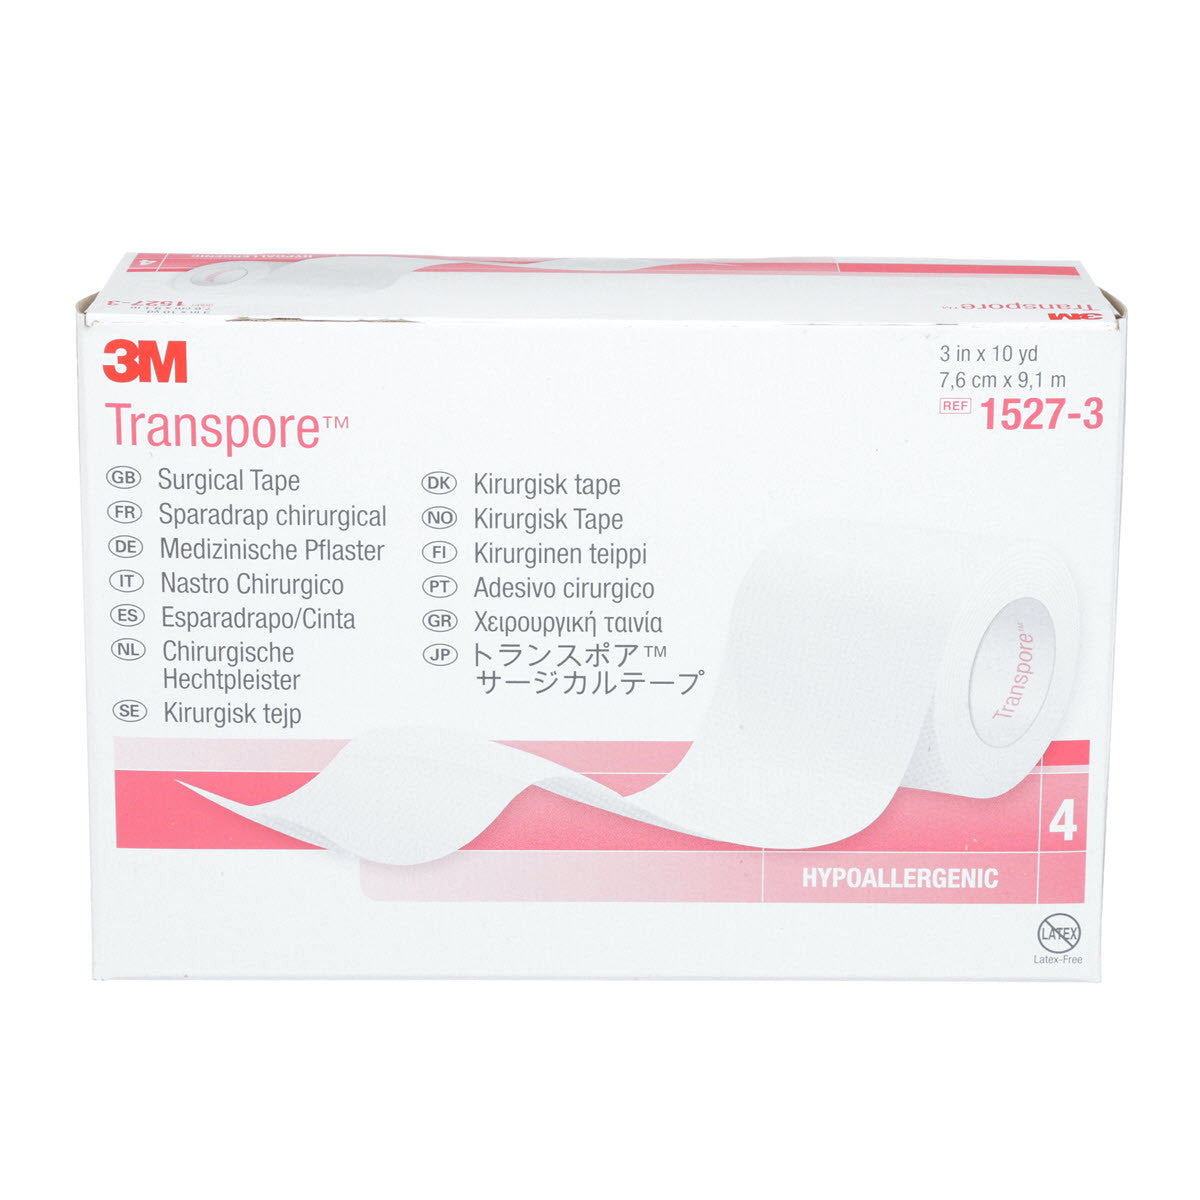 3M Micropore Medical Tape, Non-Sterile, Silicone, Blue, 2 in x 5 1/2 yds, 6  Rolls, 10 Packs, 60 Total 